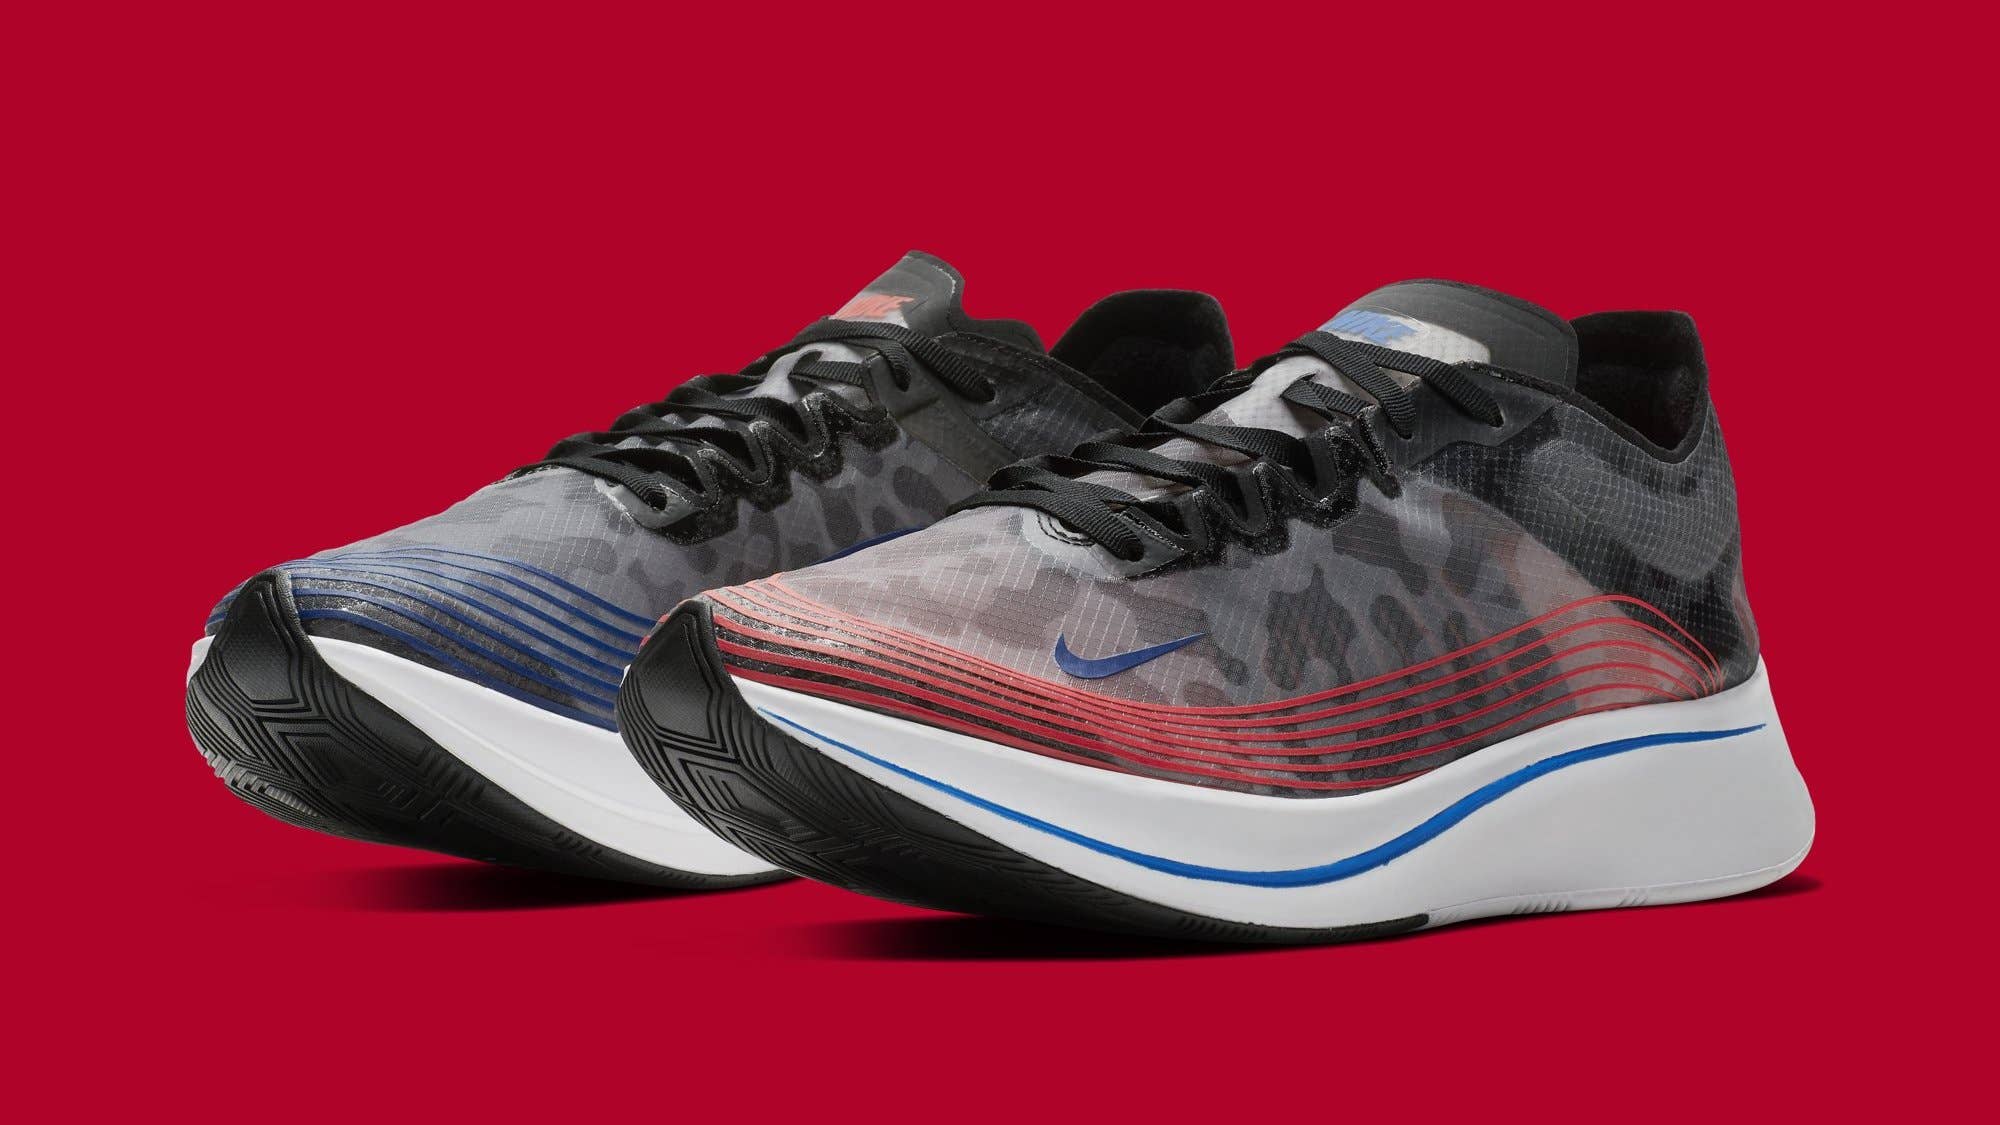 Mismatched Colorway of Nike's Zoom Fly SP